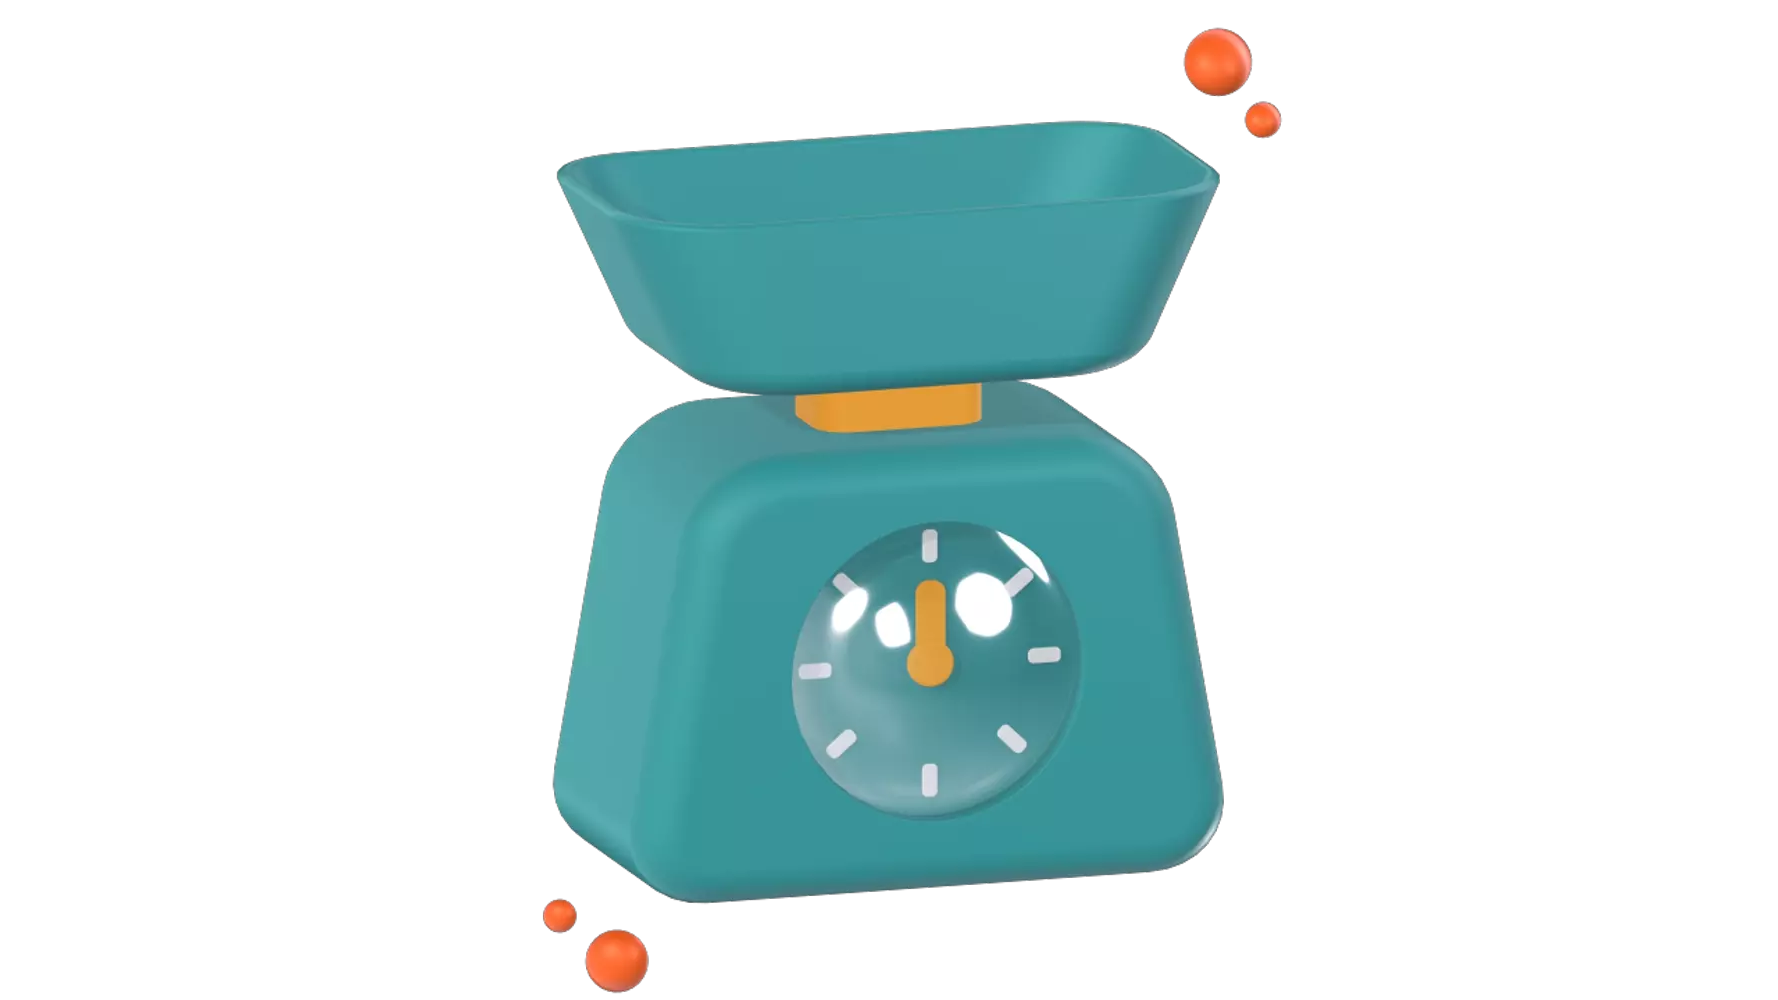 Weighing Scale 3D Graphic